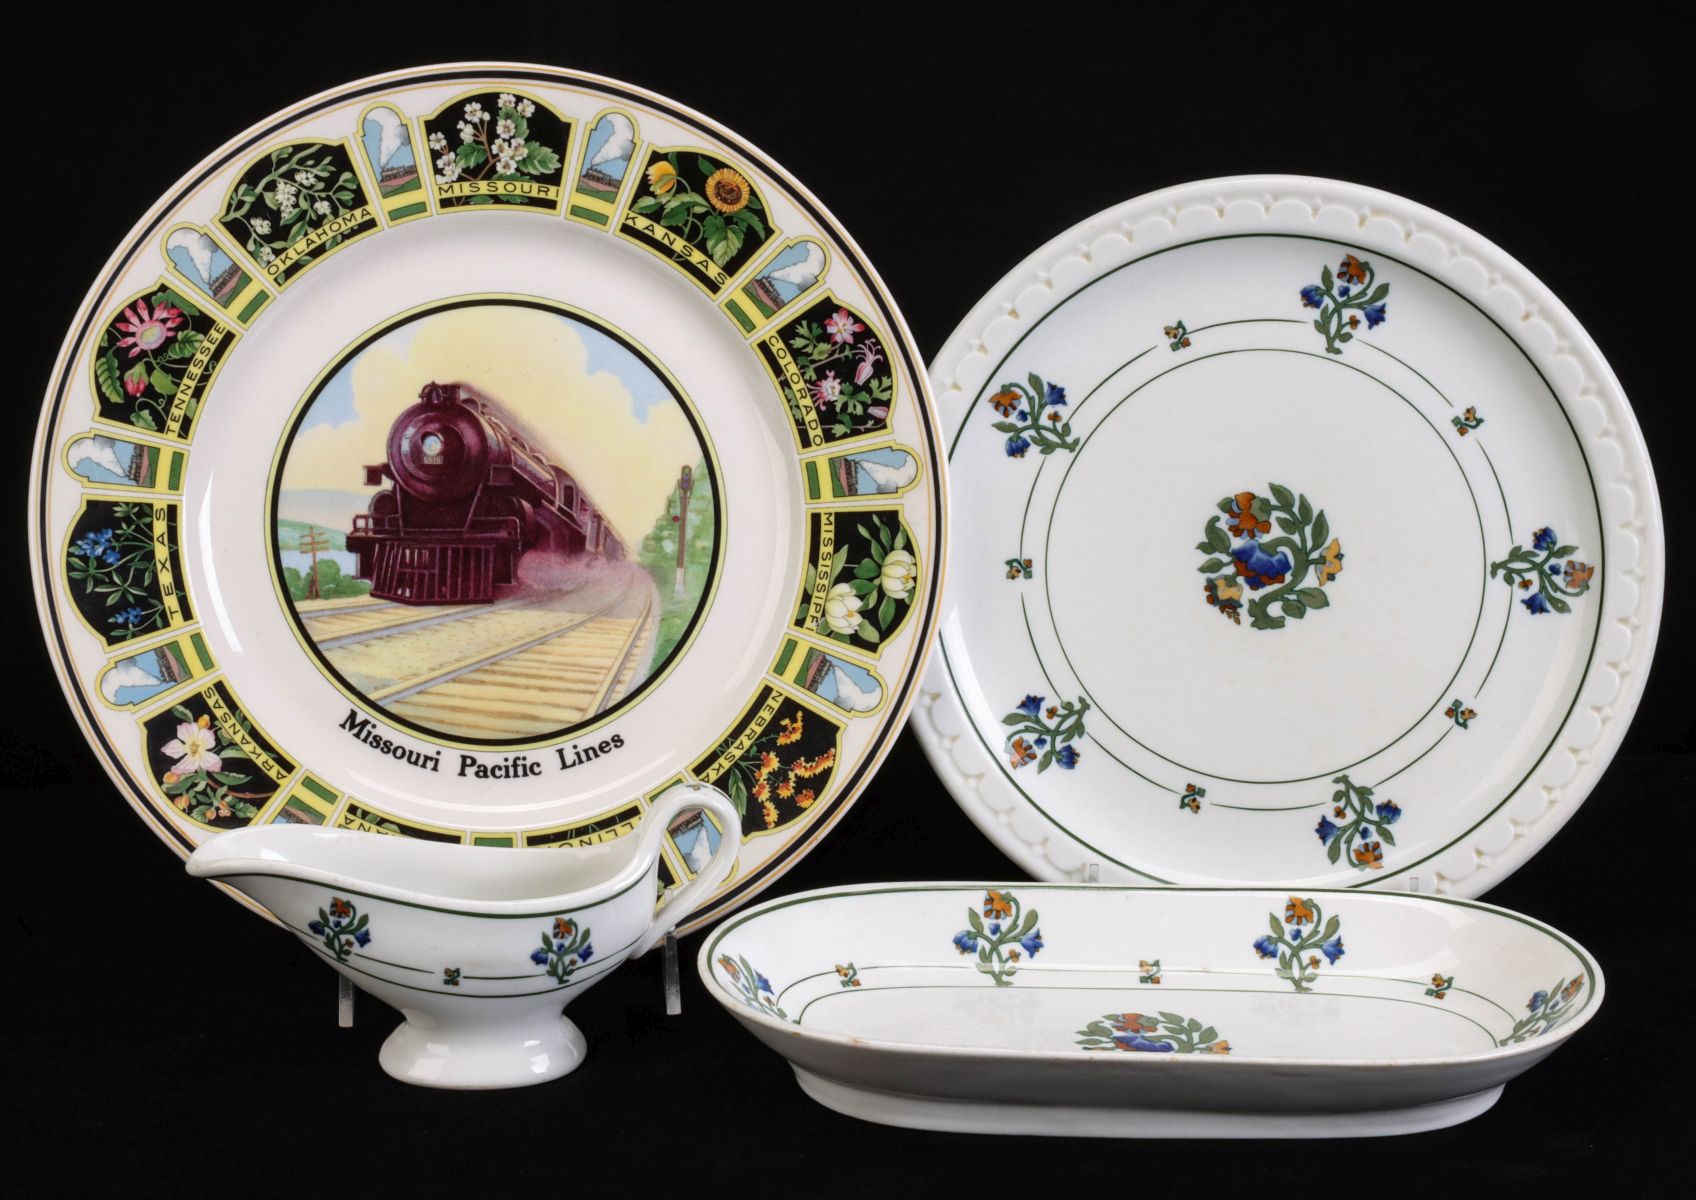 MoPAC STATE FLOWERS PLATE WITH 'ST. ALBANS' DINNERWARE